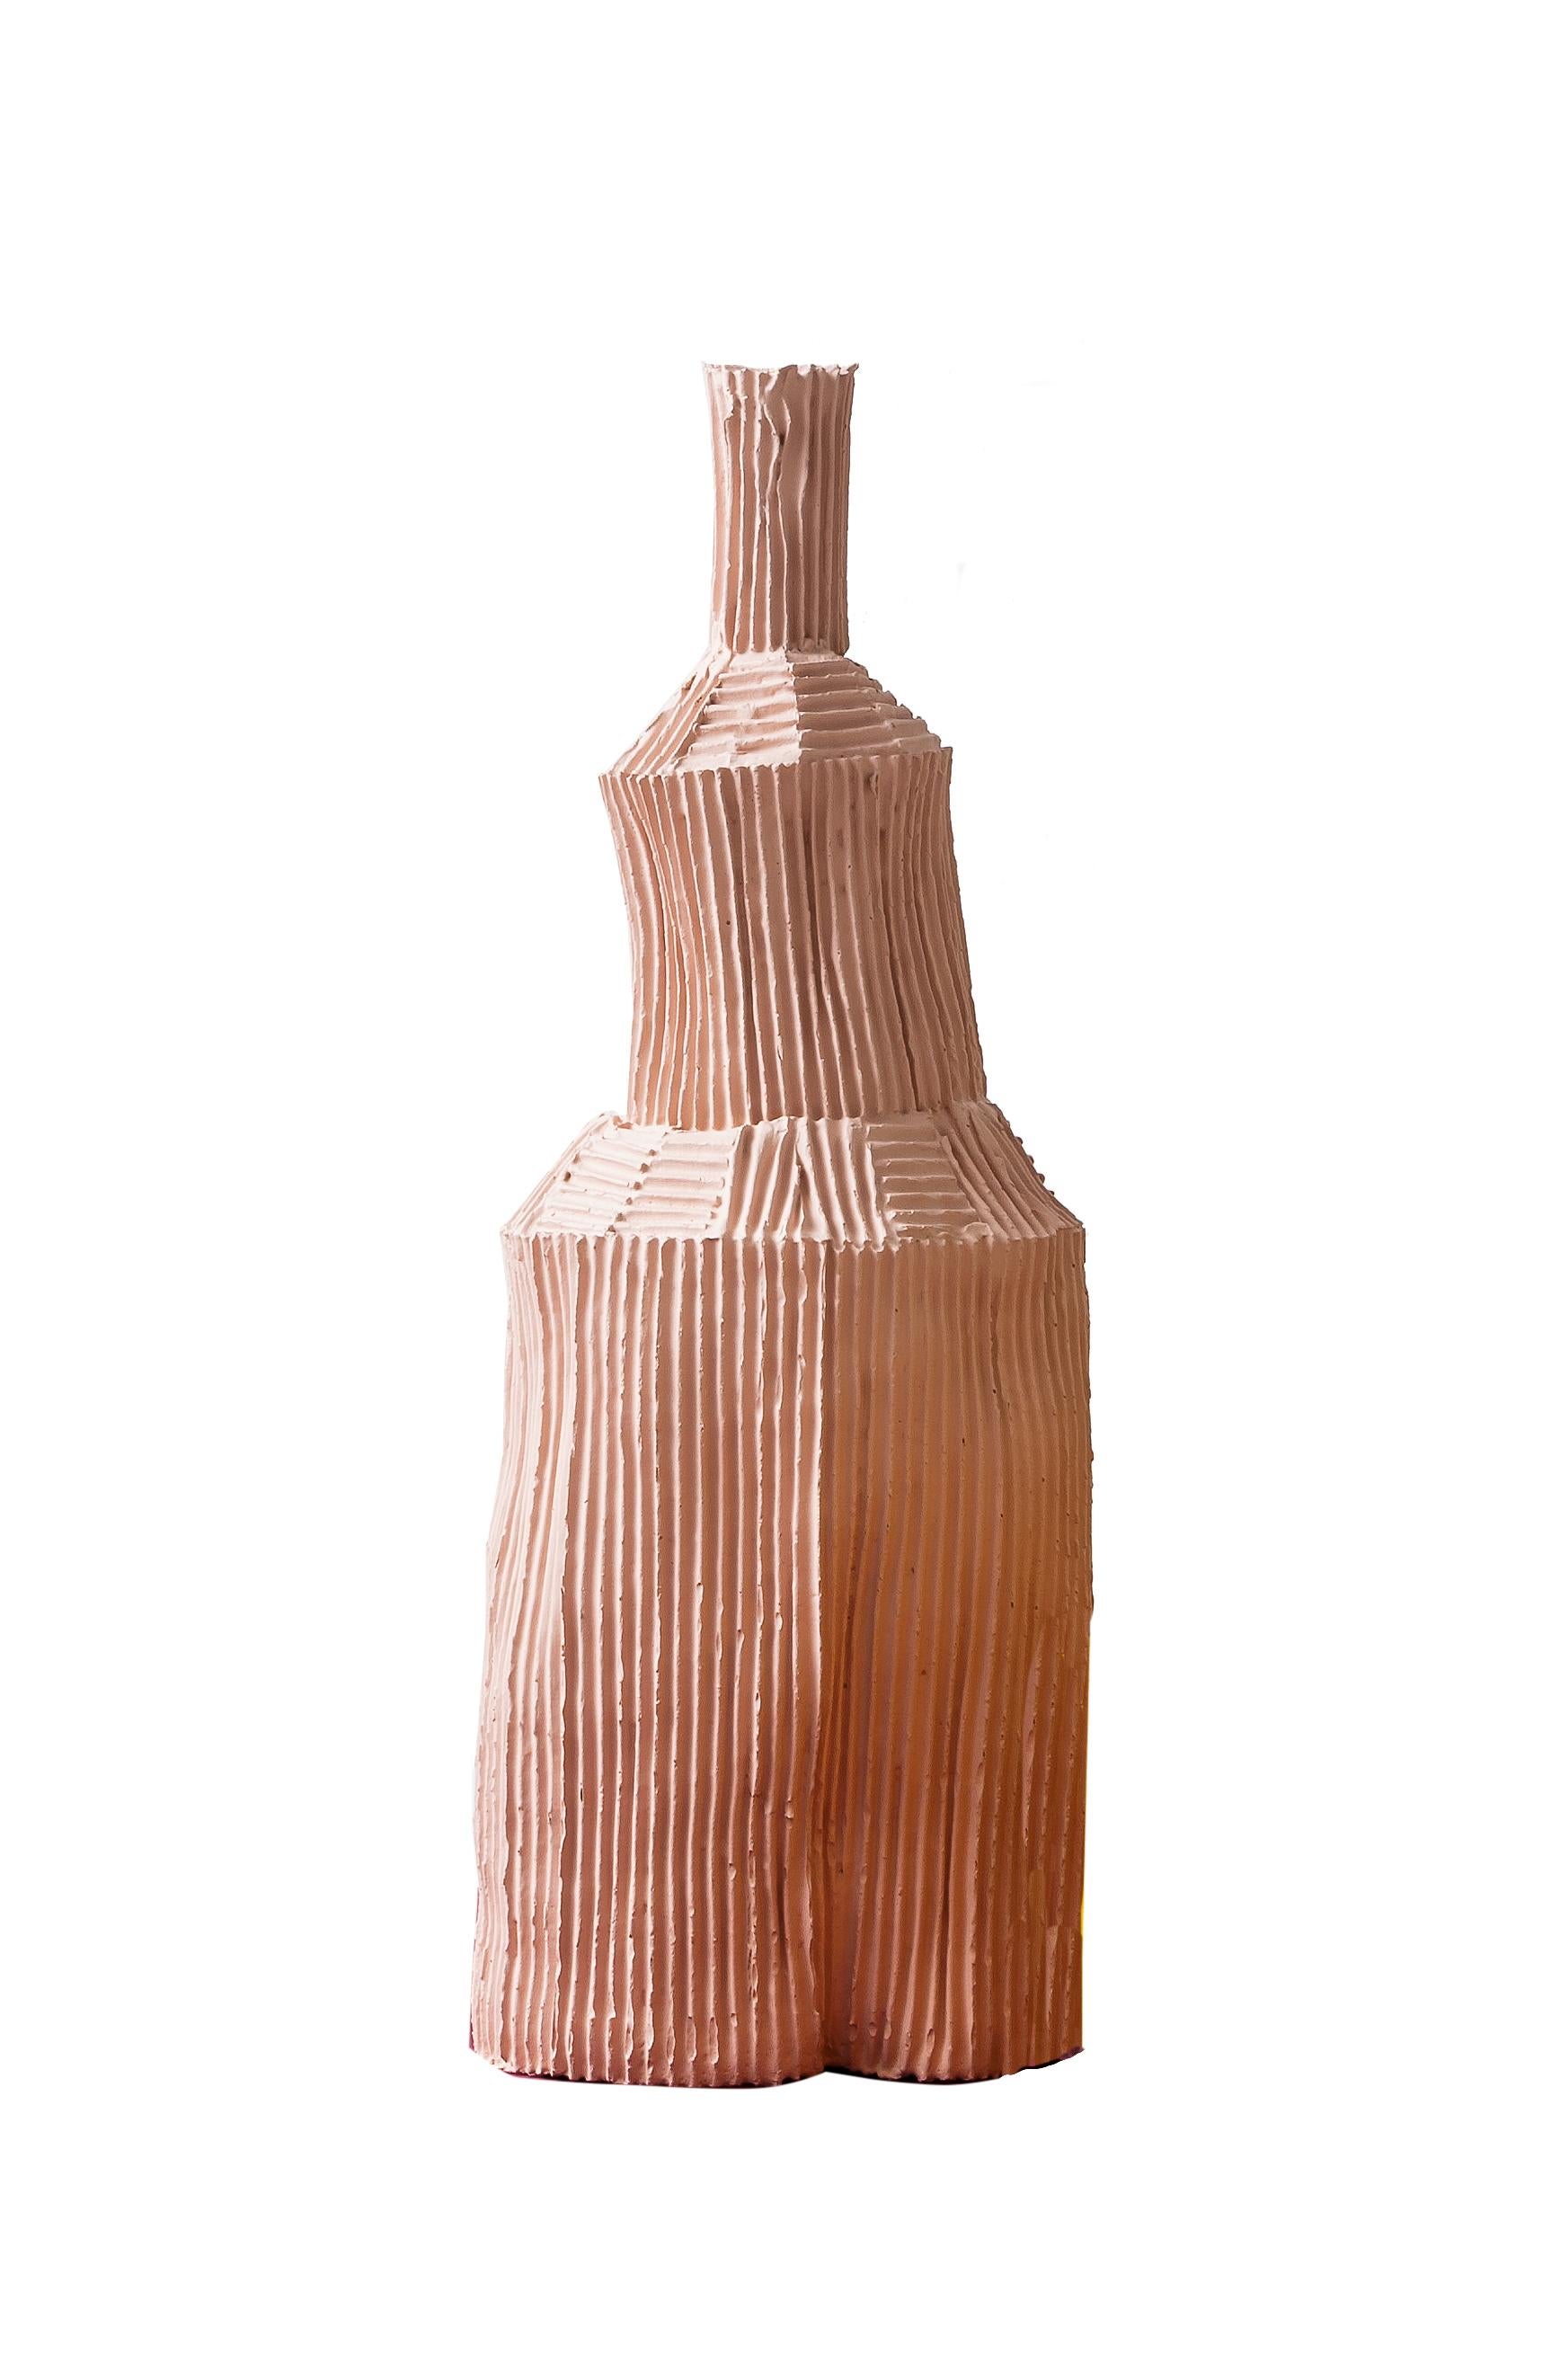 This one-of-a-kind sculpture by ceramist Paola Paronetto is part of the Fide series, inspired by the religious architecture of cathedrals. The silhouette is composed of three cylinders stacked in decreasing order with an eye-catching ridged surface